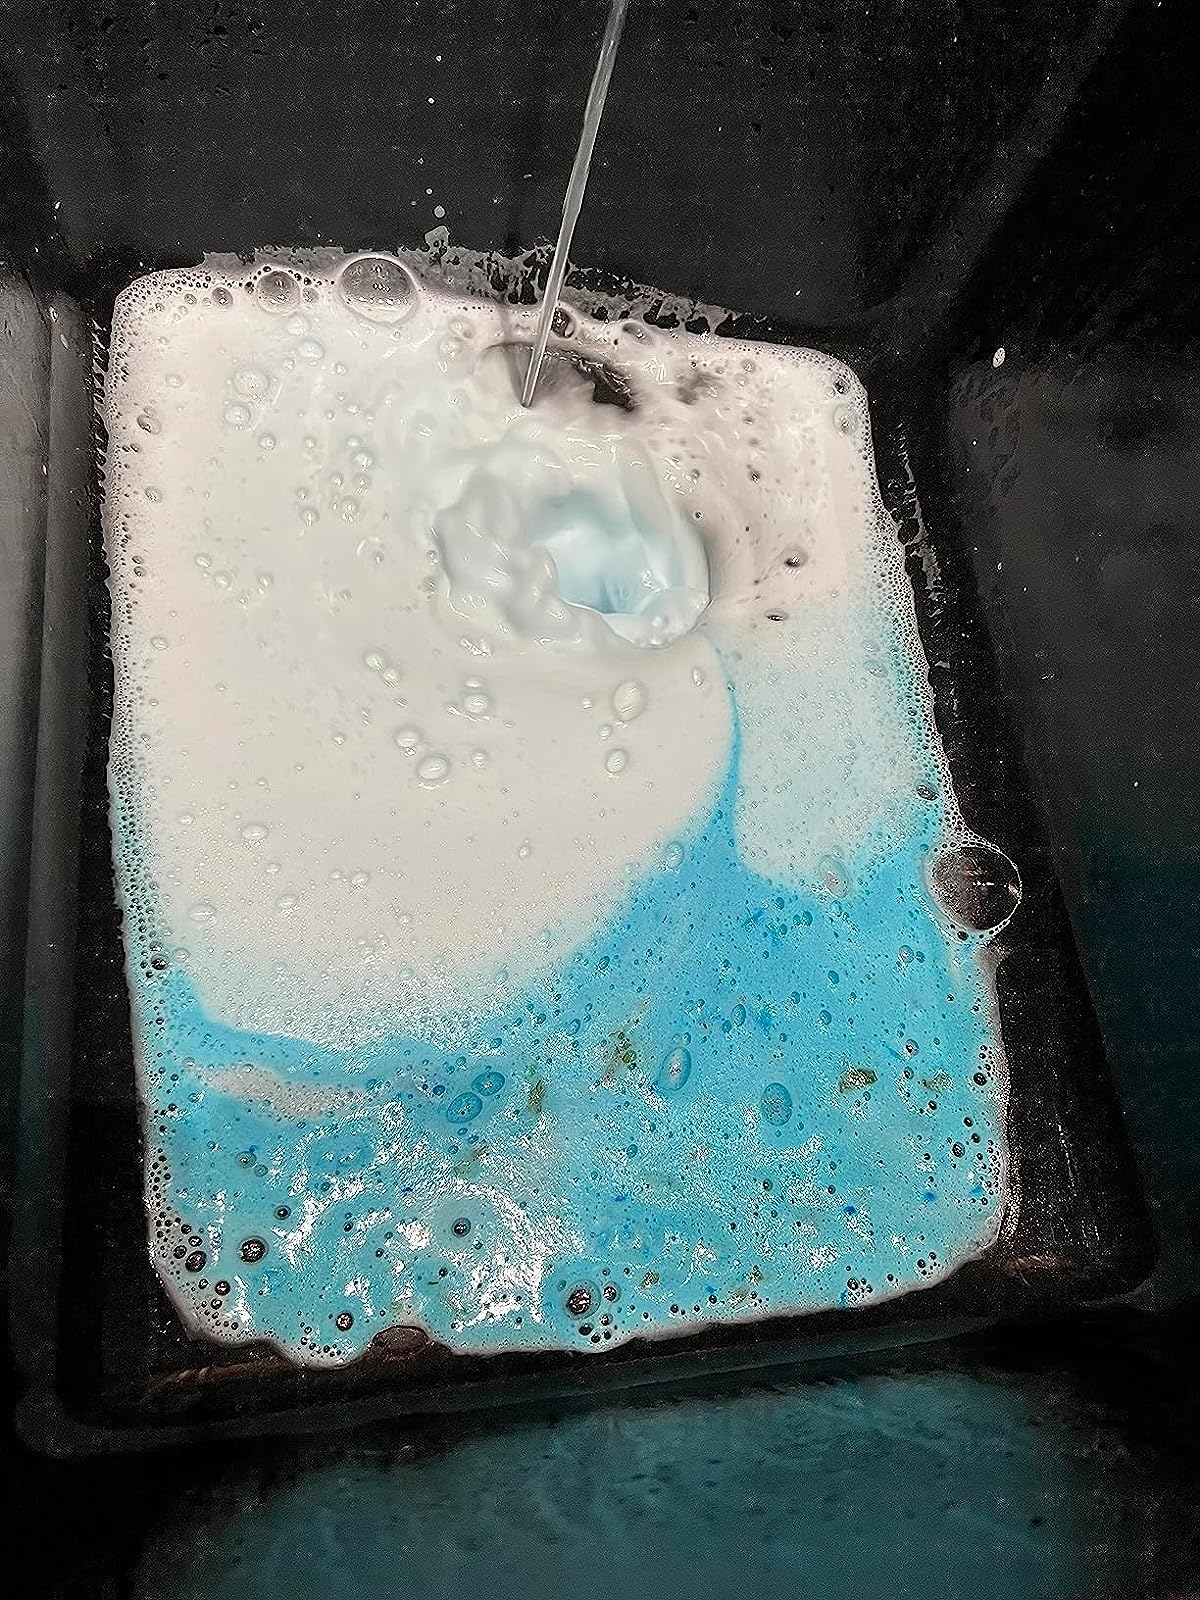 Reviewer’s photo of foaming garbage disposer cleaner